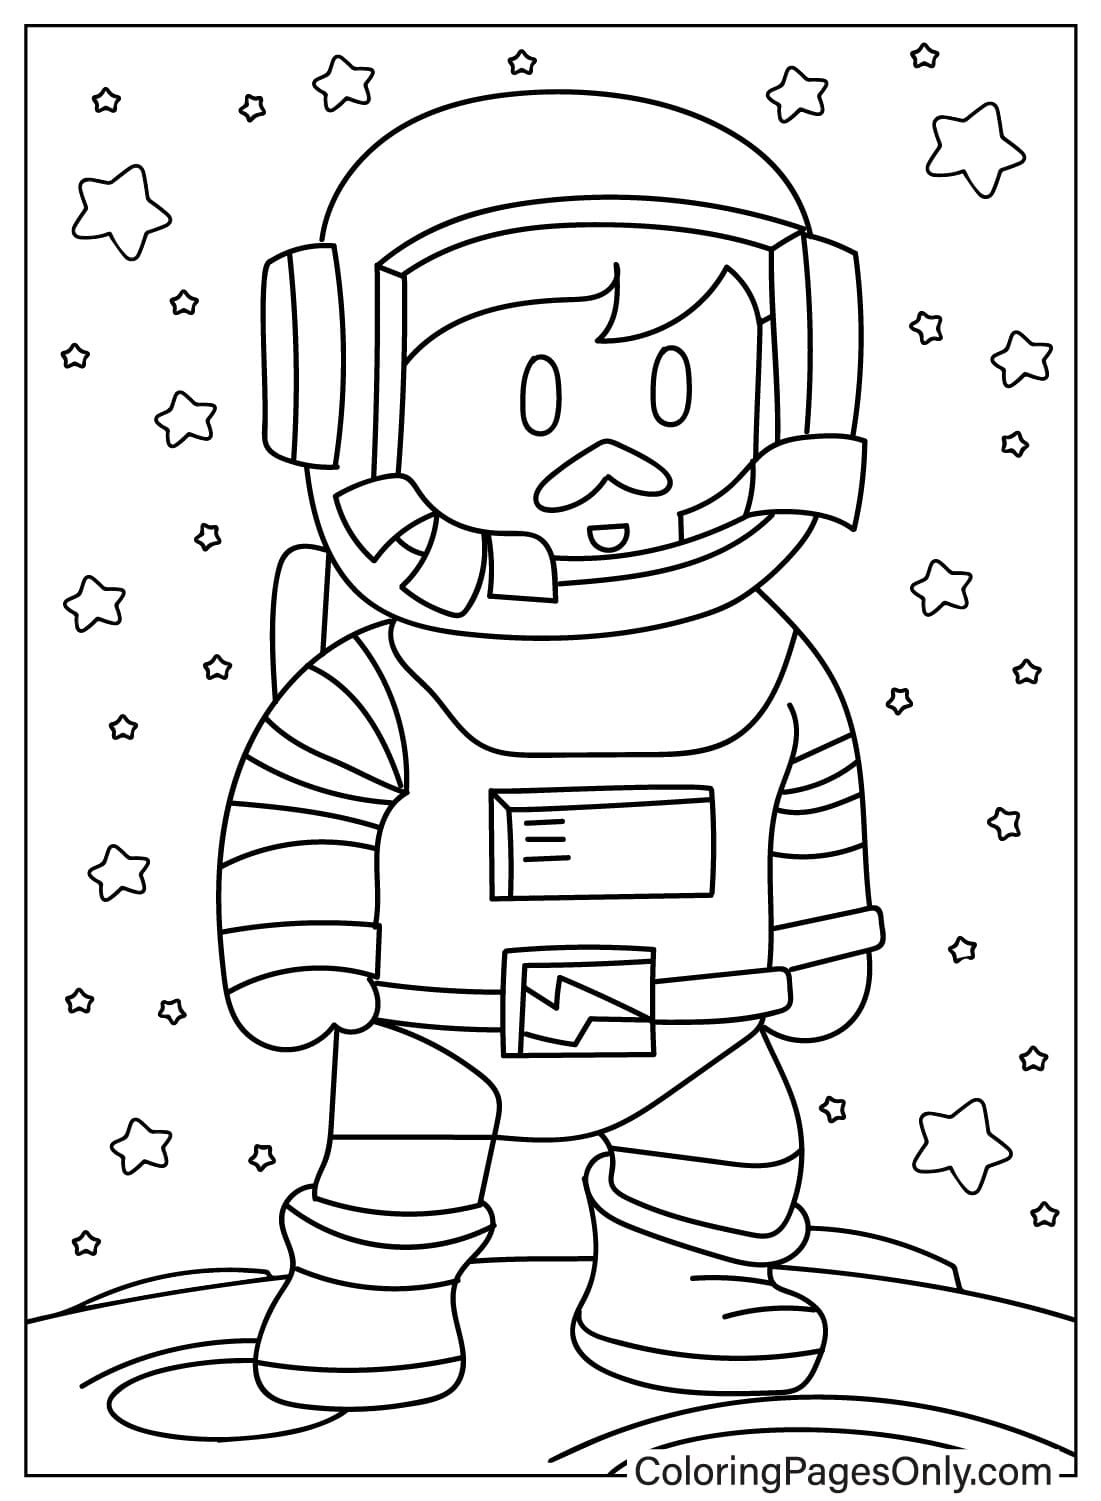 Stumble Guys Coloring Page Free Printable from Stumble Guys